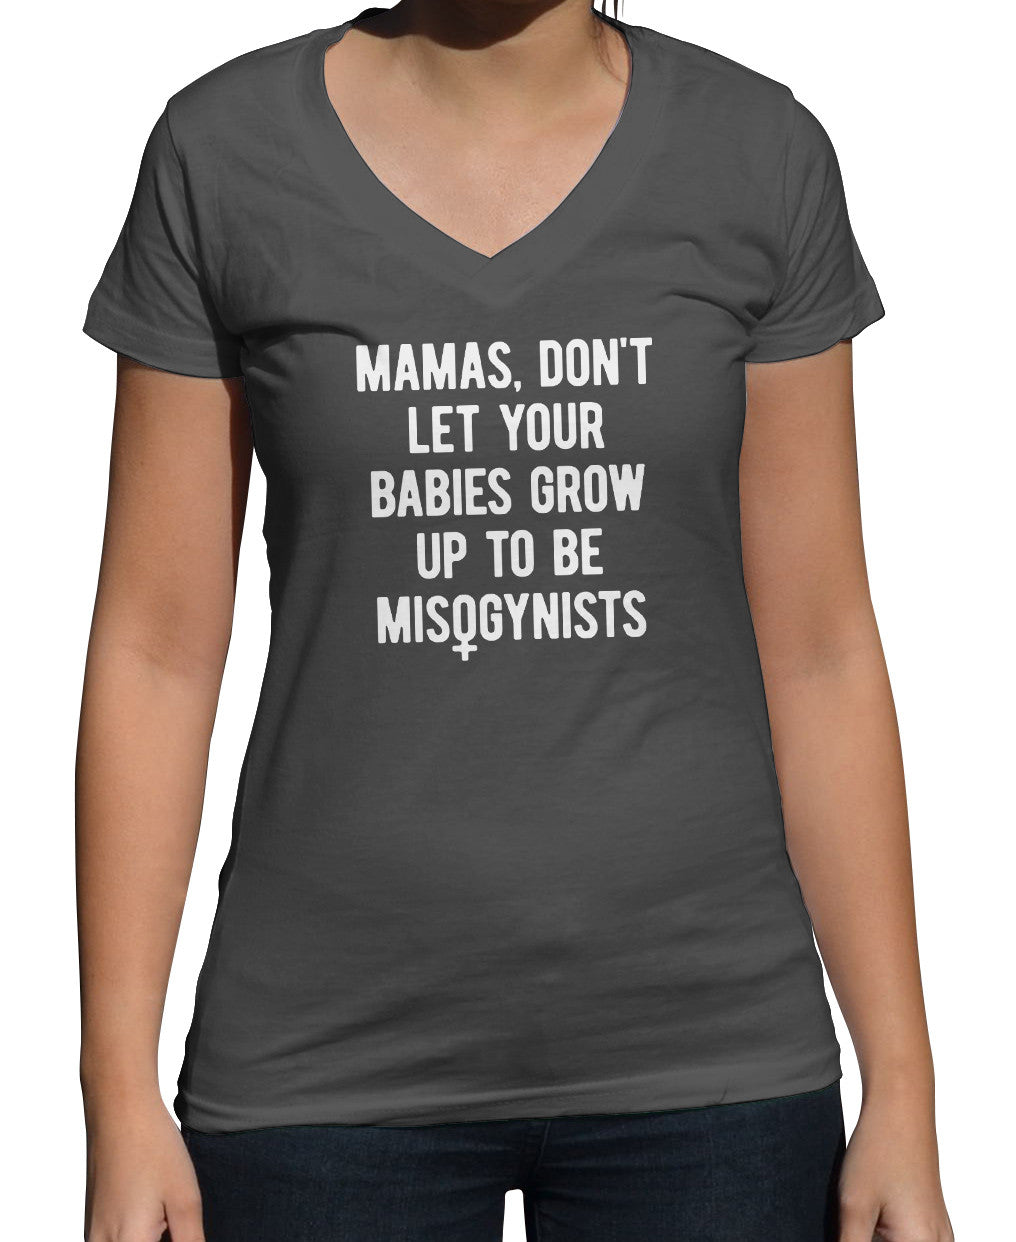 Women's Mamas Don't Let Your Babies Grow Up to be Misogynists Vneck T-Shirt